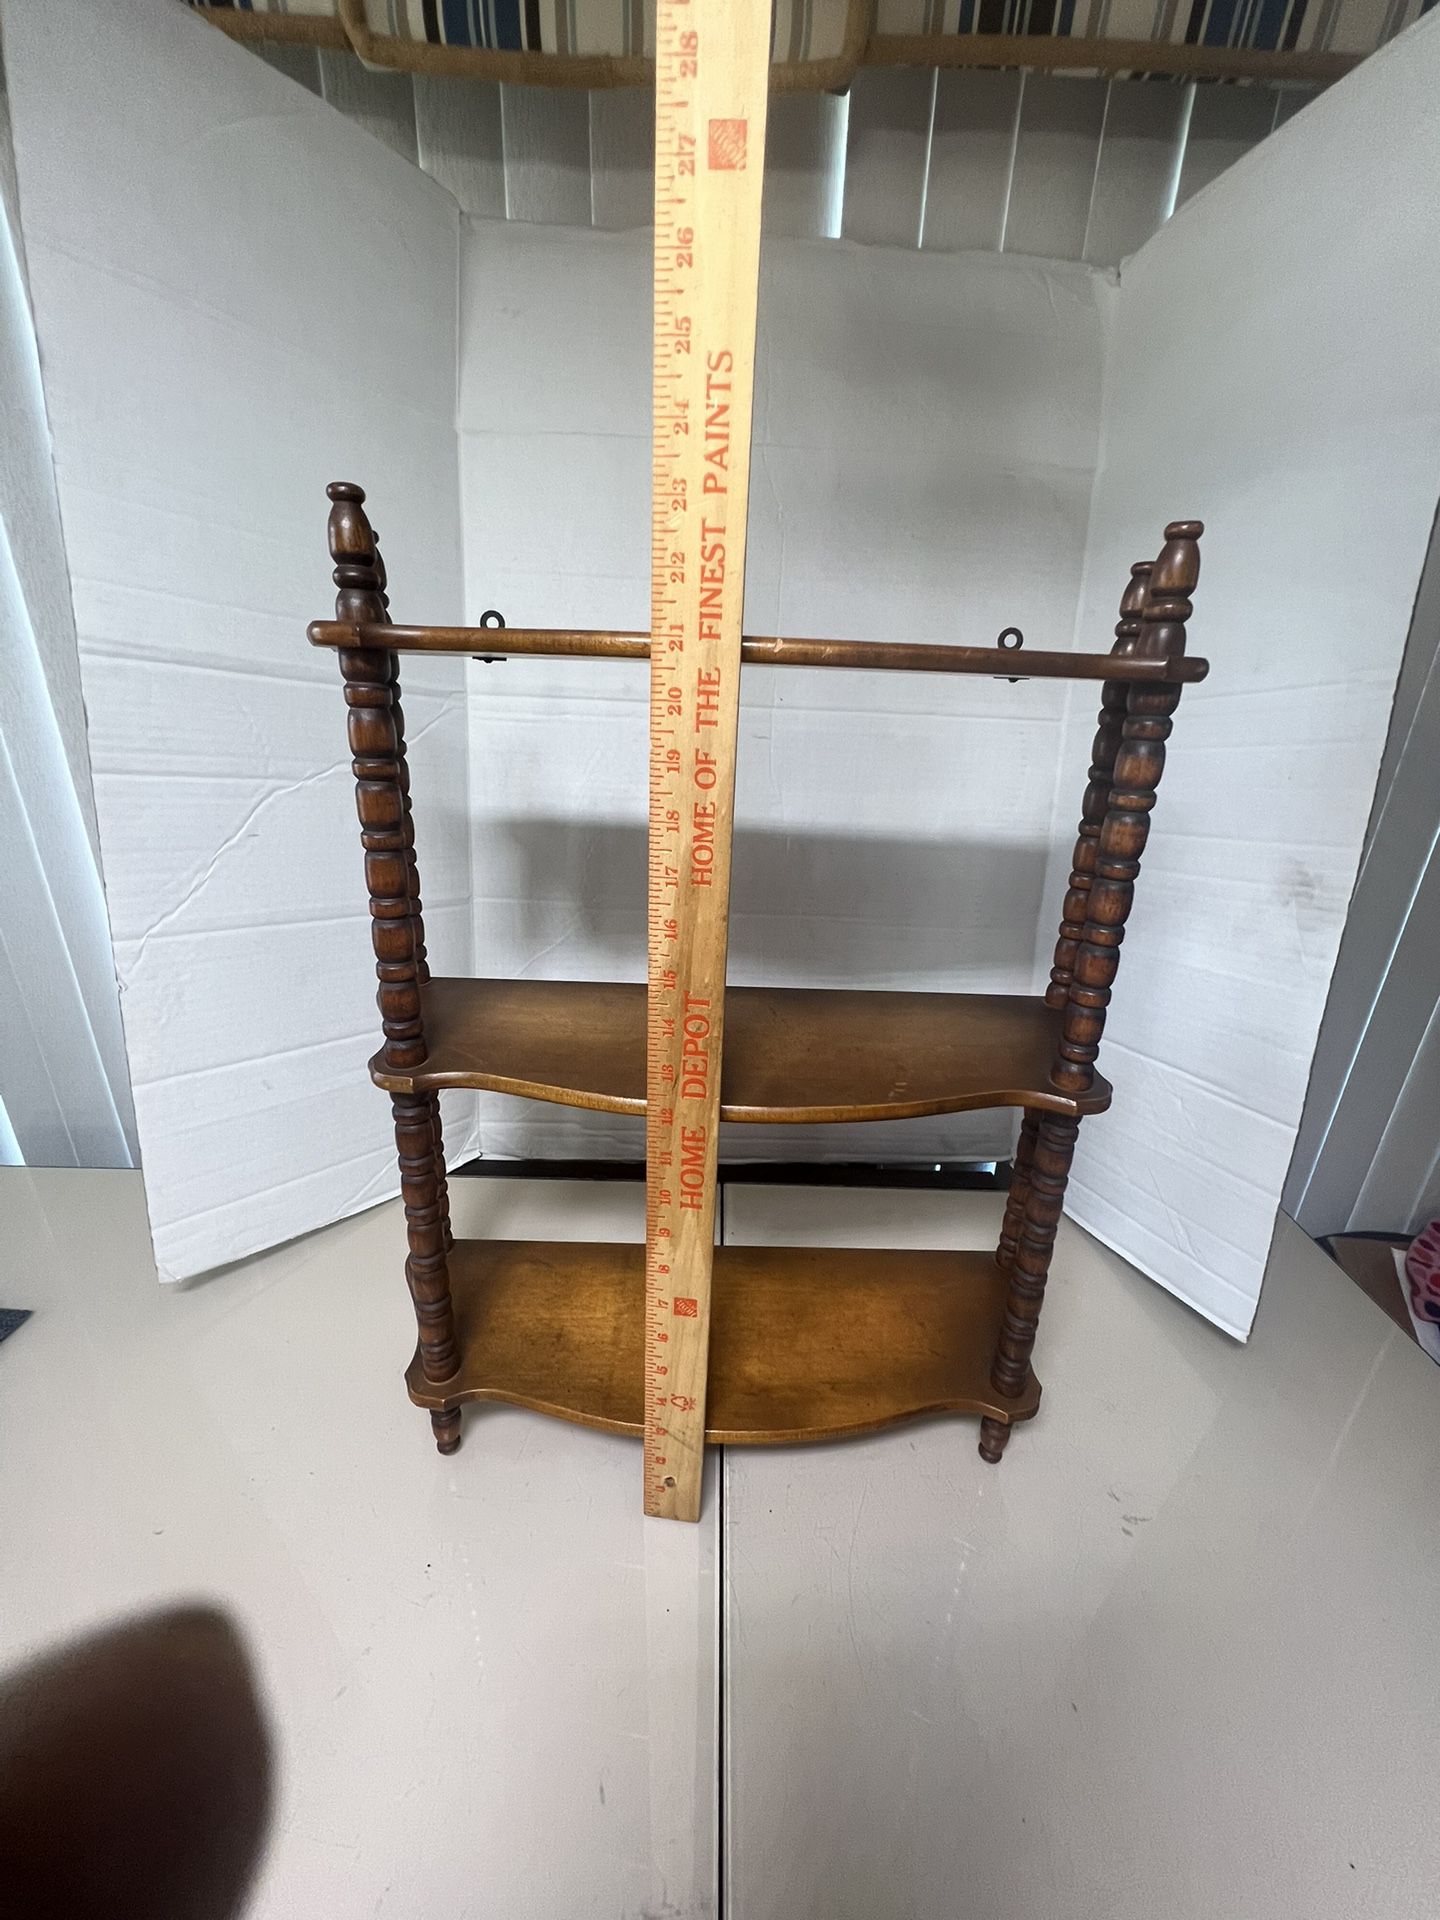 Vintage Wood Wall Shelf 3 Tier Trinket Display. Used in good condition with minor cosmetic blemishes. These blemishes are in the form of some minor sc